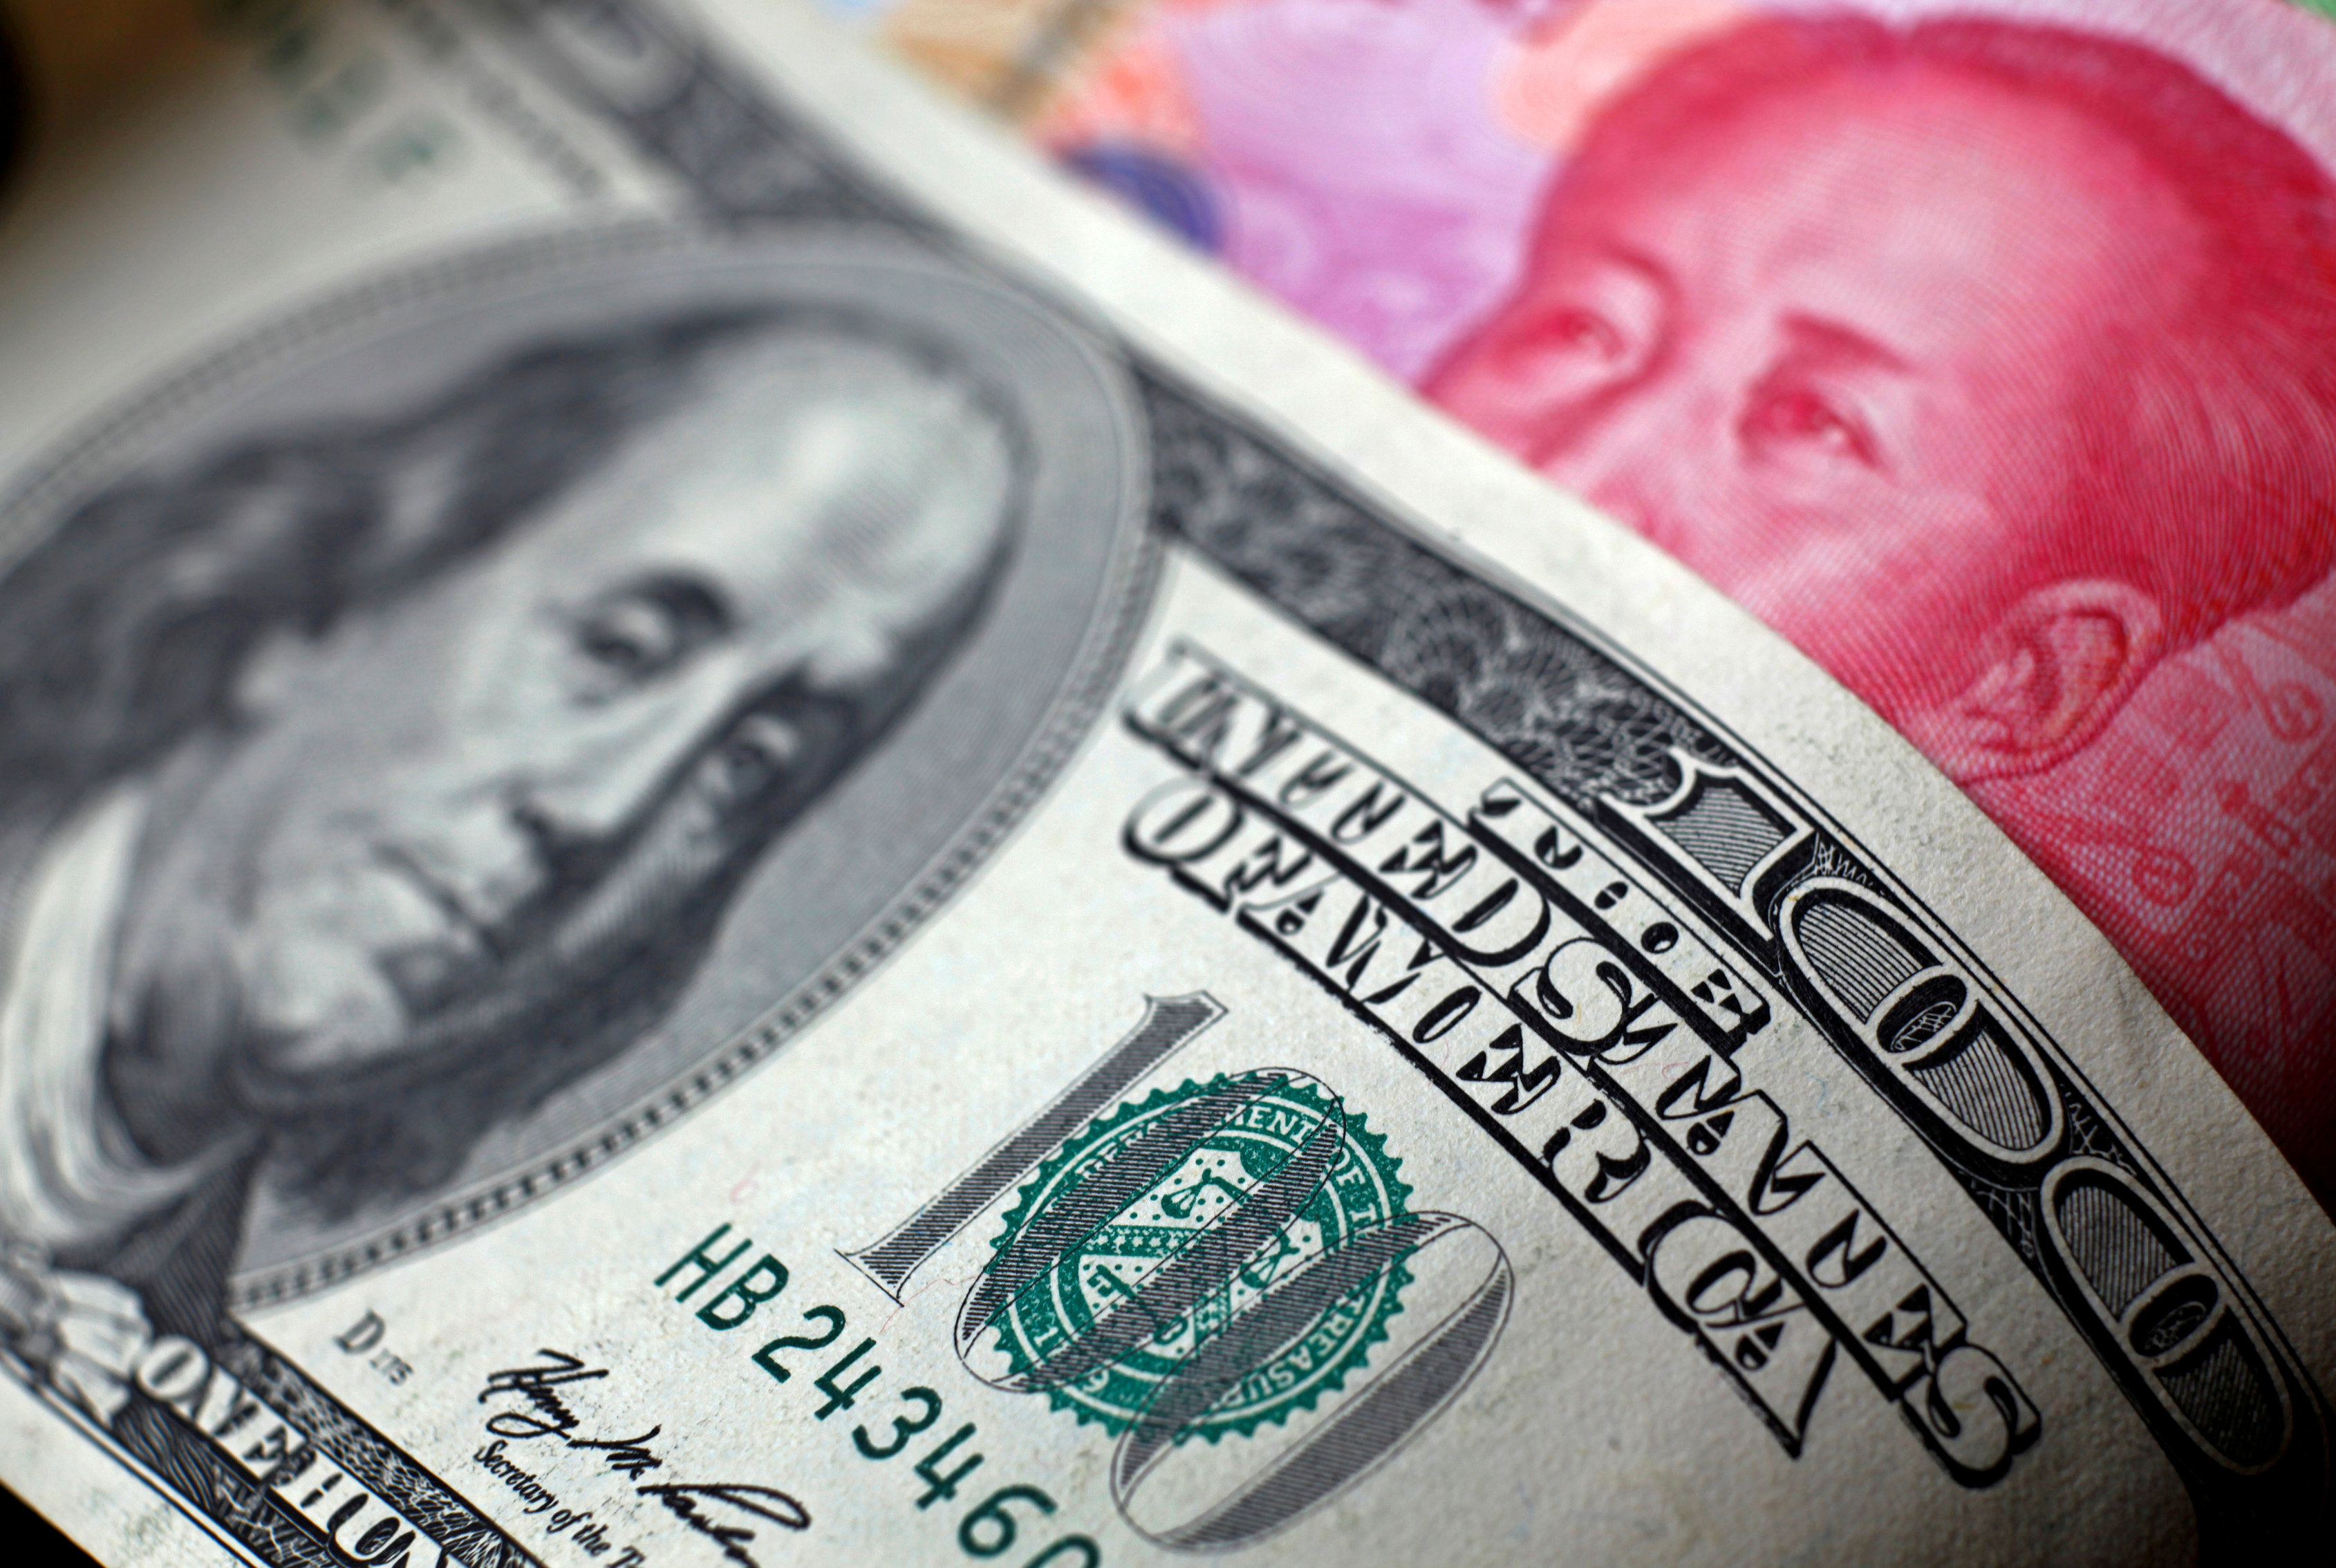 The US dollar remains in wider use internationally compared with the yuan. Photo: Reuters